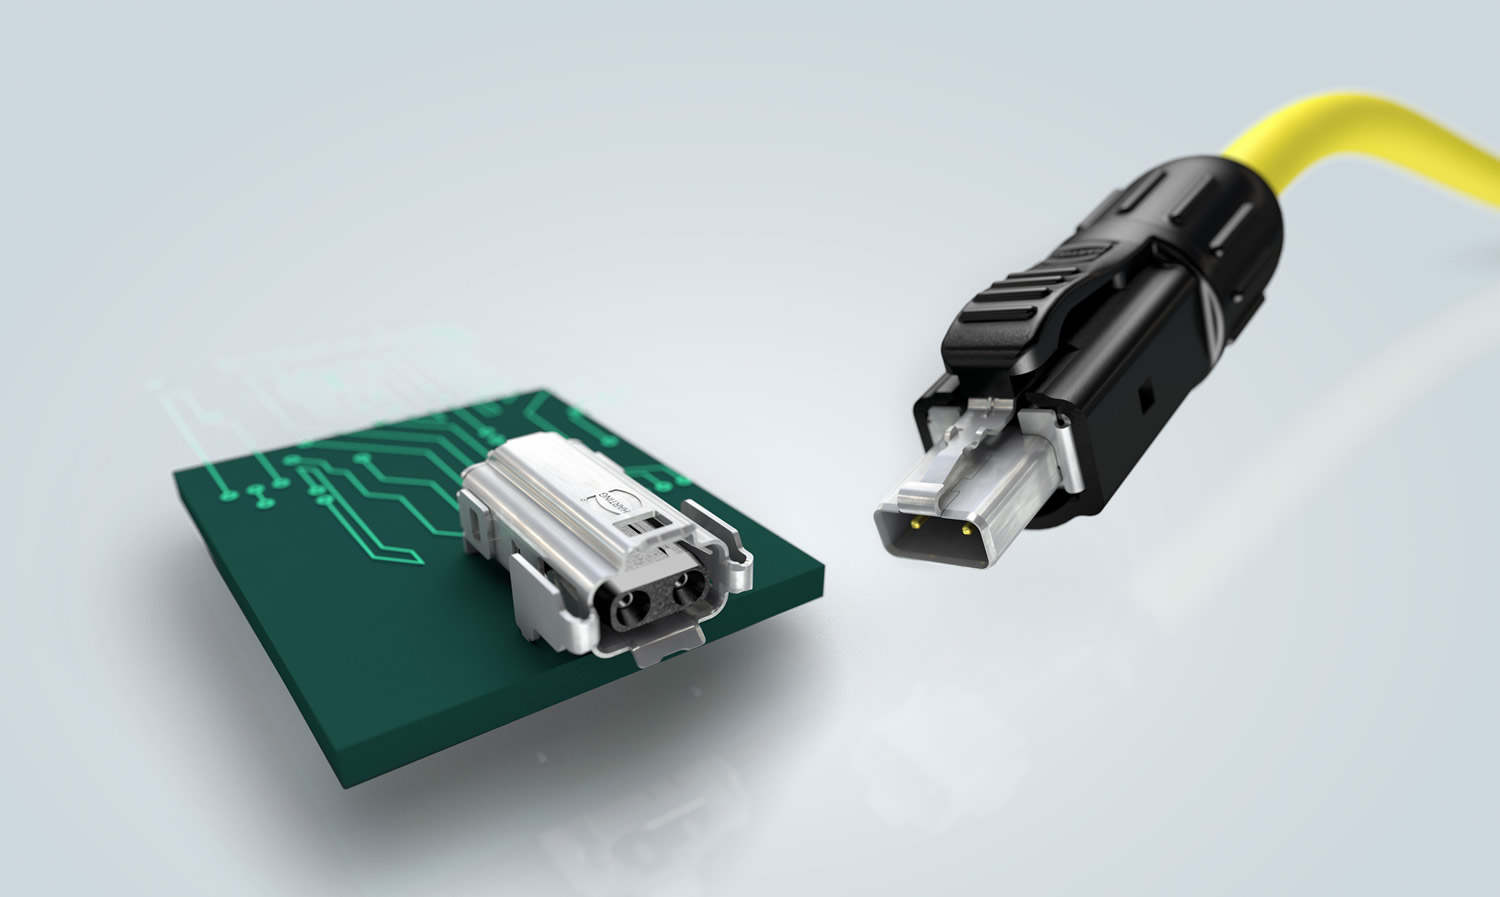 HARTING's T1 Industrial Combo Ethernet cable connector